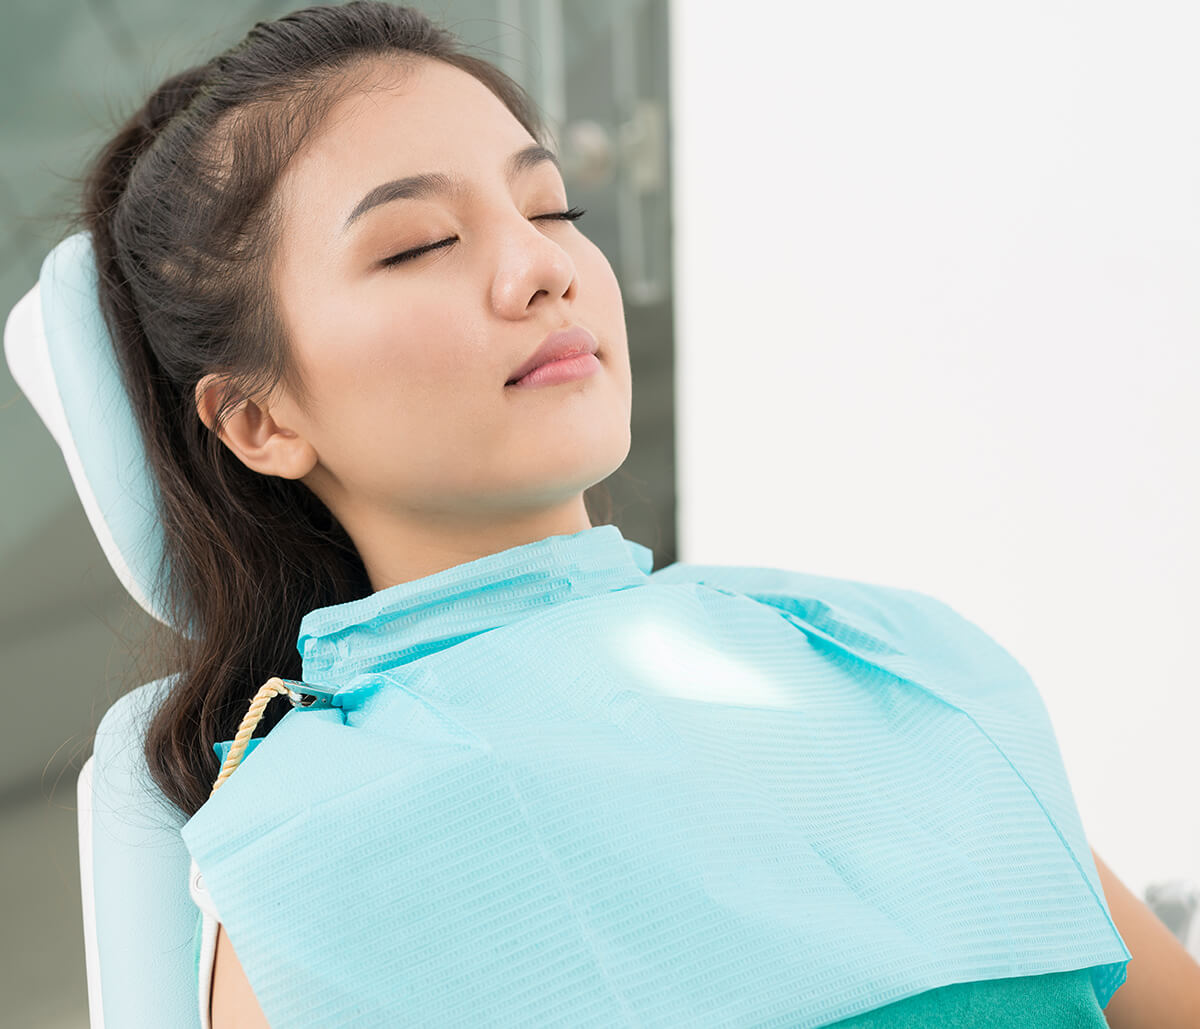 Sedation Dentistry for Dental Anxiety in Fort Worth Area